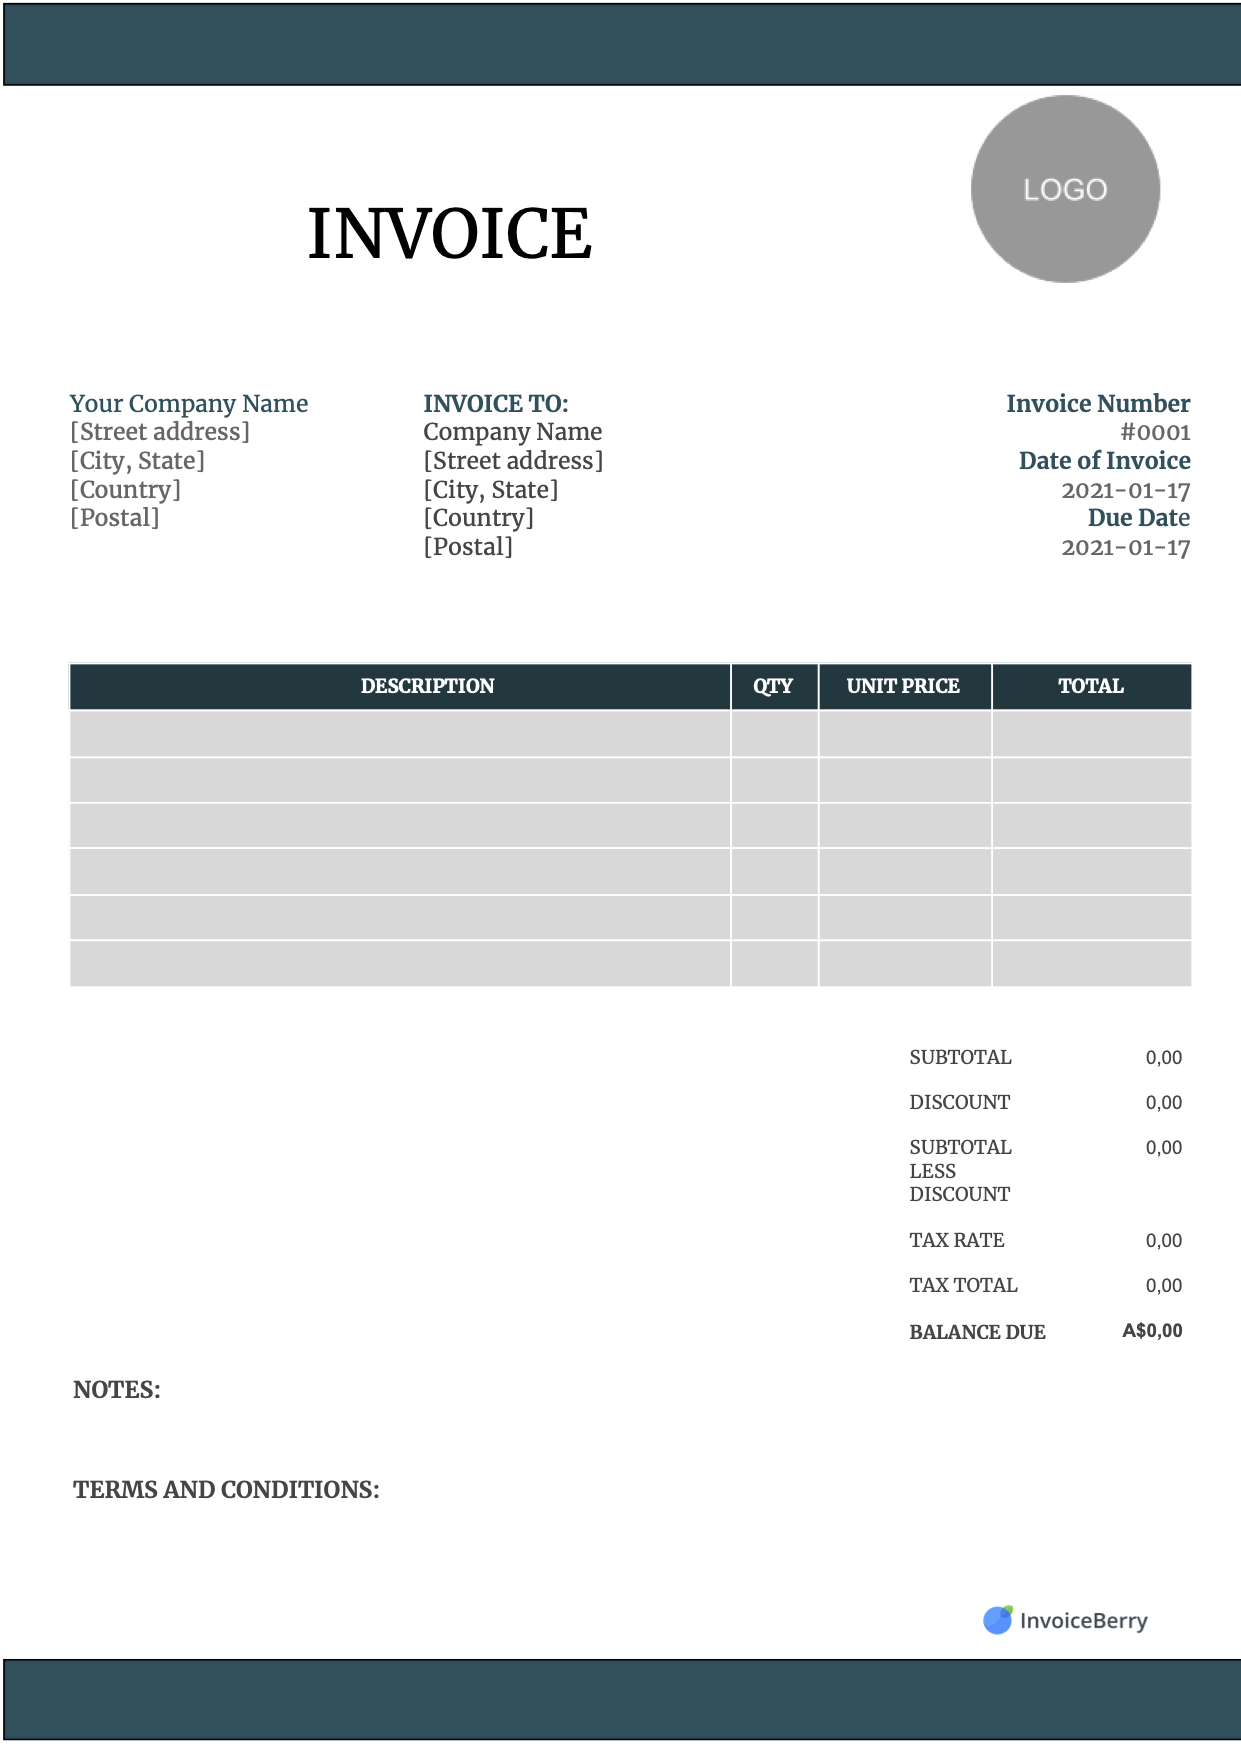 Free Google Drive Invoice Templates: Blank Docs & Sheets Invoices Intended For Google Doc Invoice Template